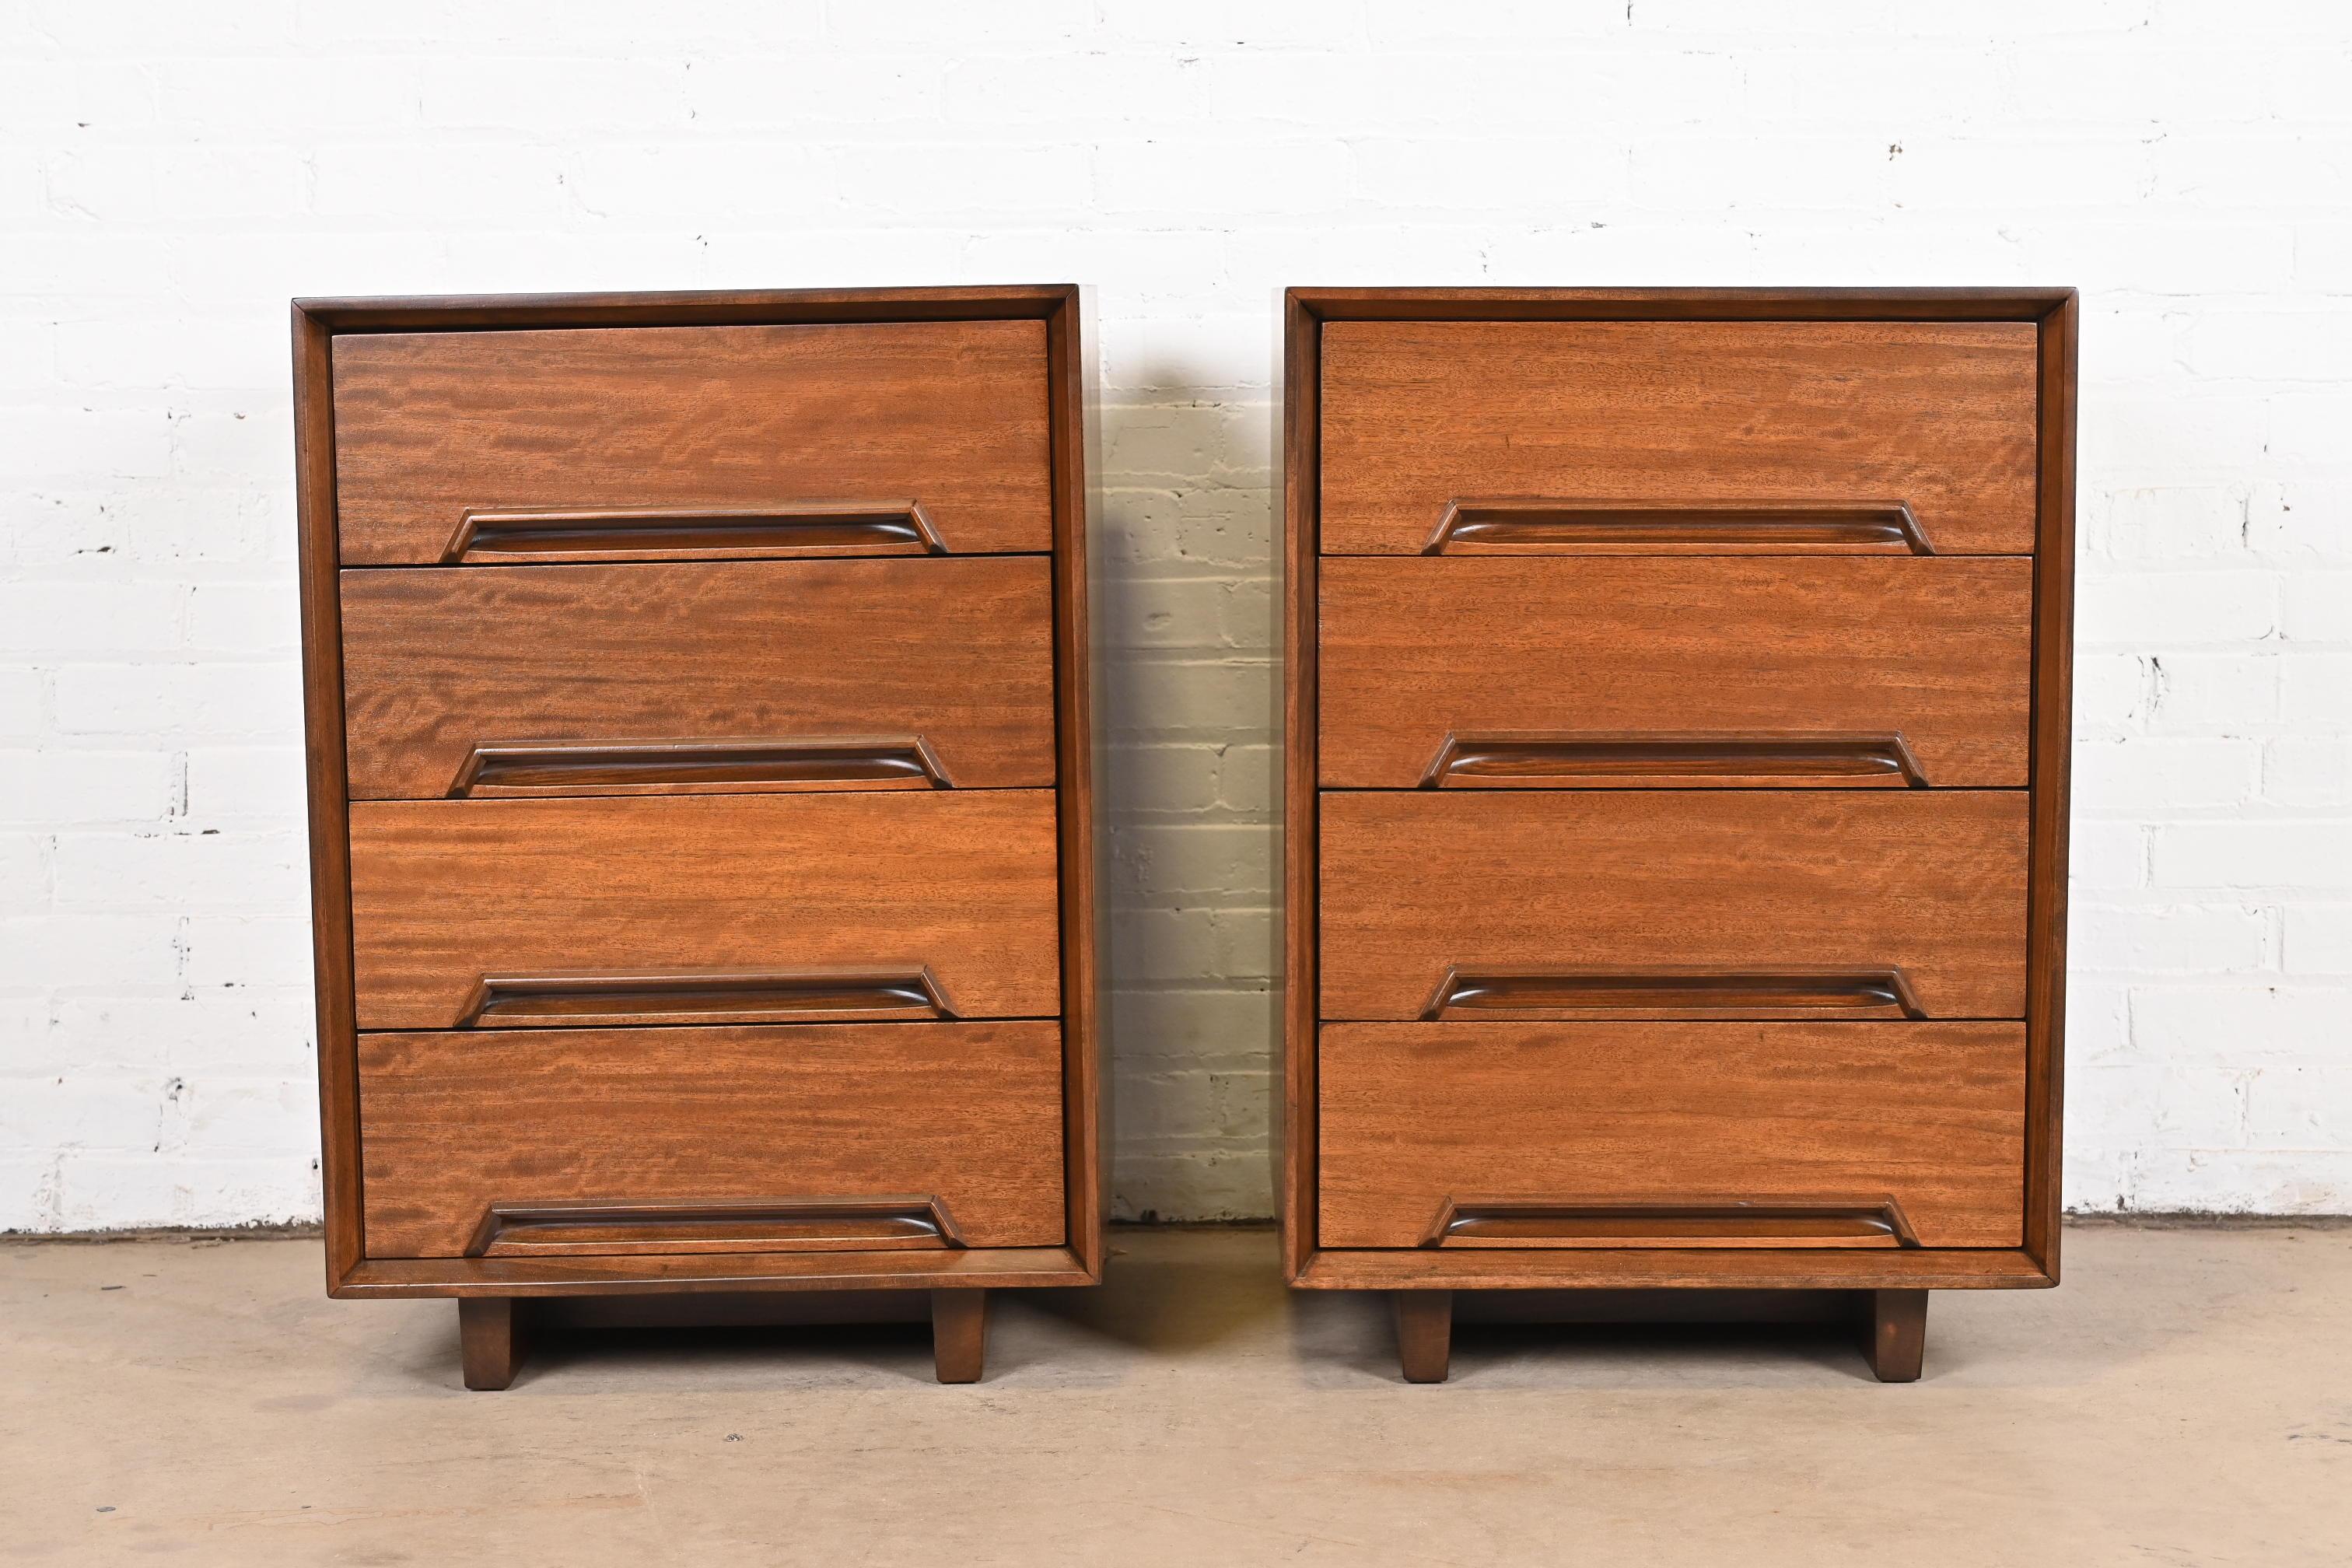 A gorgeous pair of Mid-Century Modern four-drawer nightstands or chests of drawers in exotic Mindoro wood

By Milo Baughman for Drexel, 